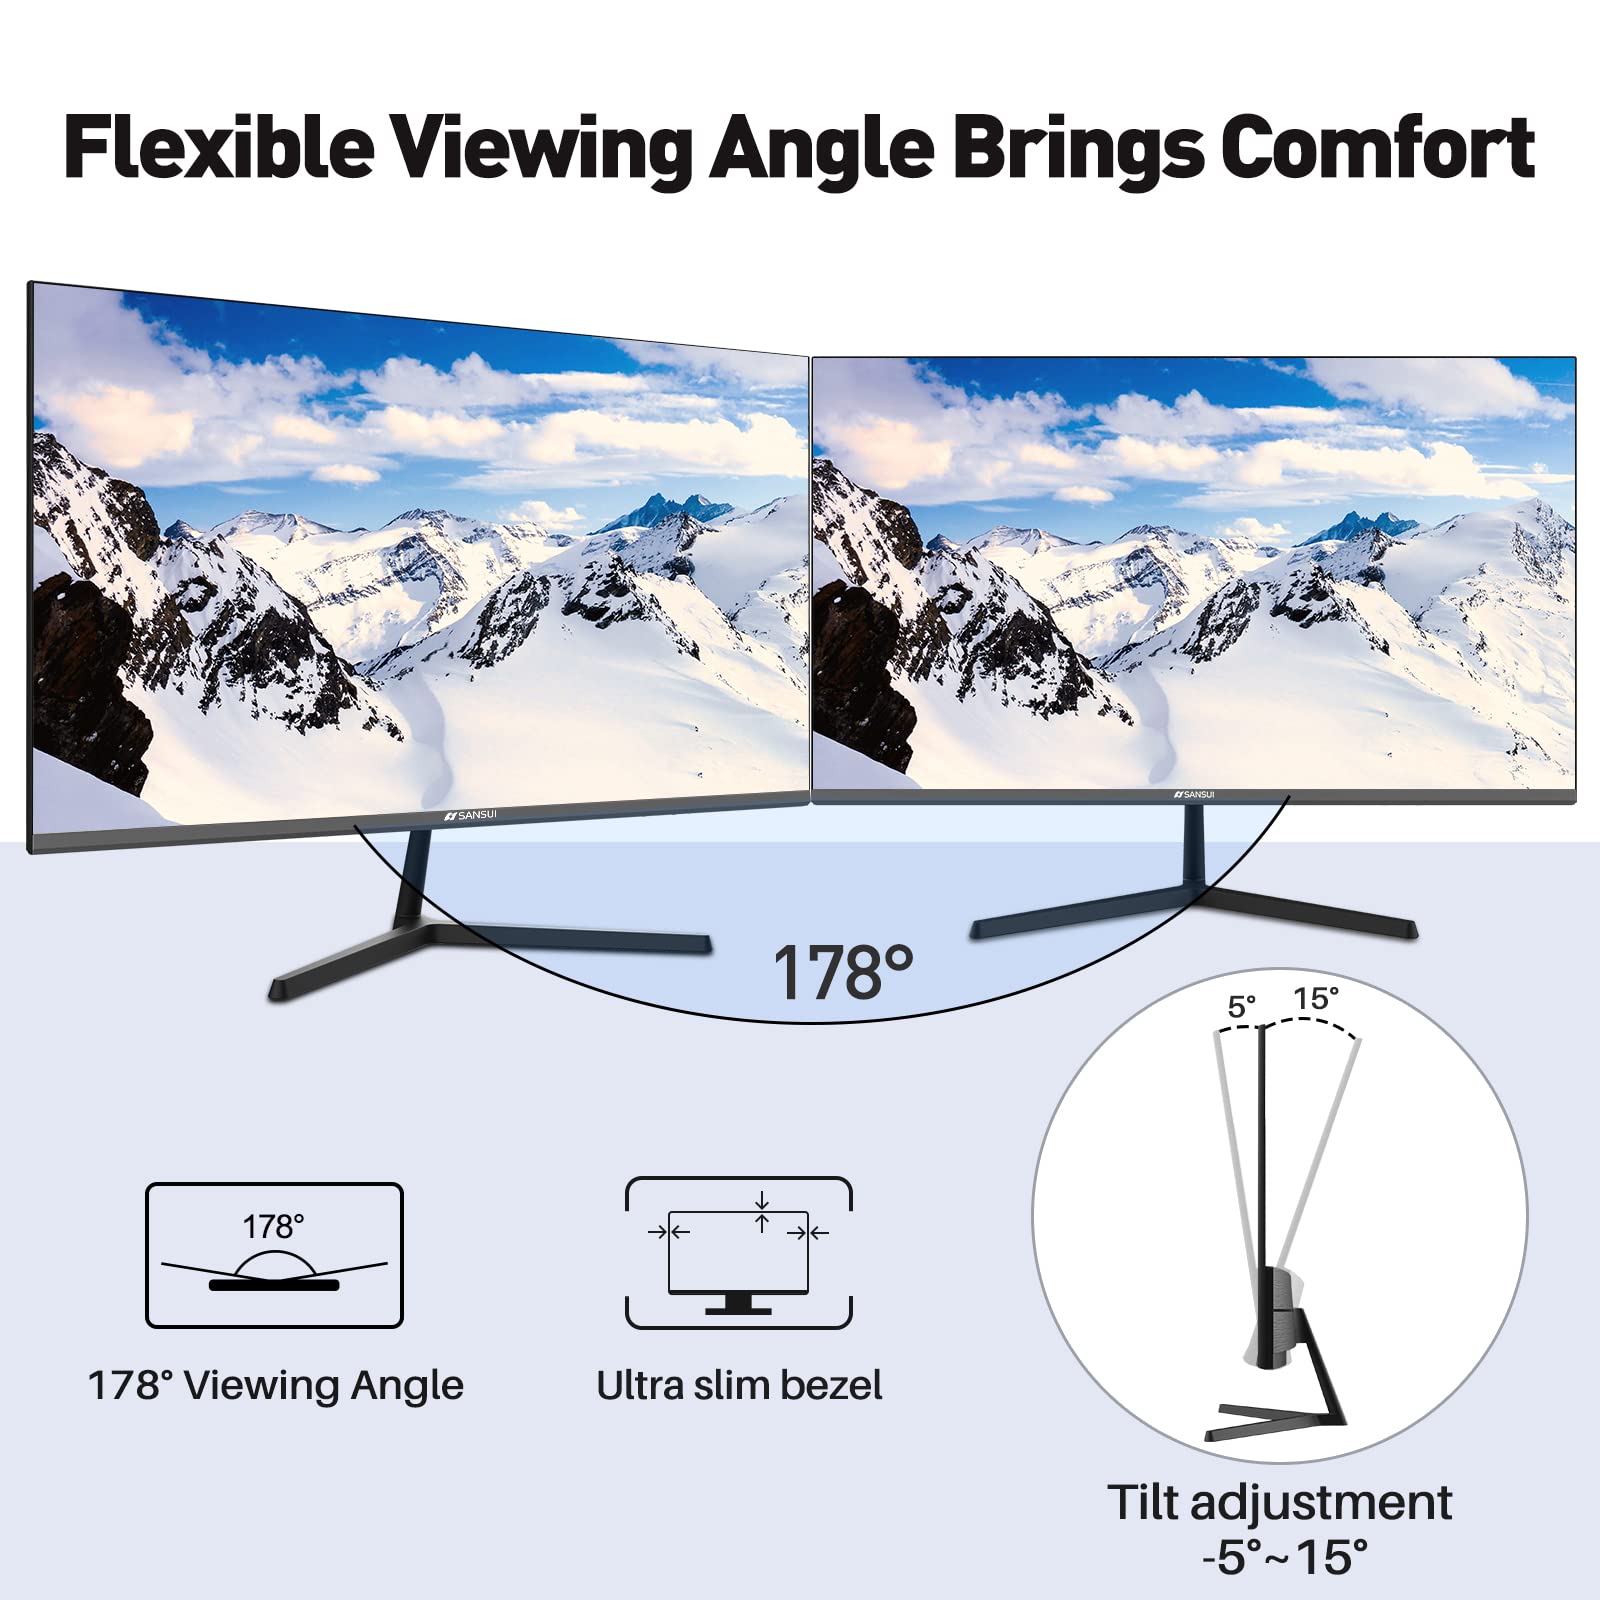 SANSUI Monitor 22 Inch IPS 75Hz FHD 1080P HDMI VGA Ports Computer Monitor Ultra-Thin Tilt Adjustable VESA Mount Compatible with Eye Comfort 178° Wide Viewing Angle for Game and Office